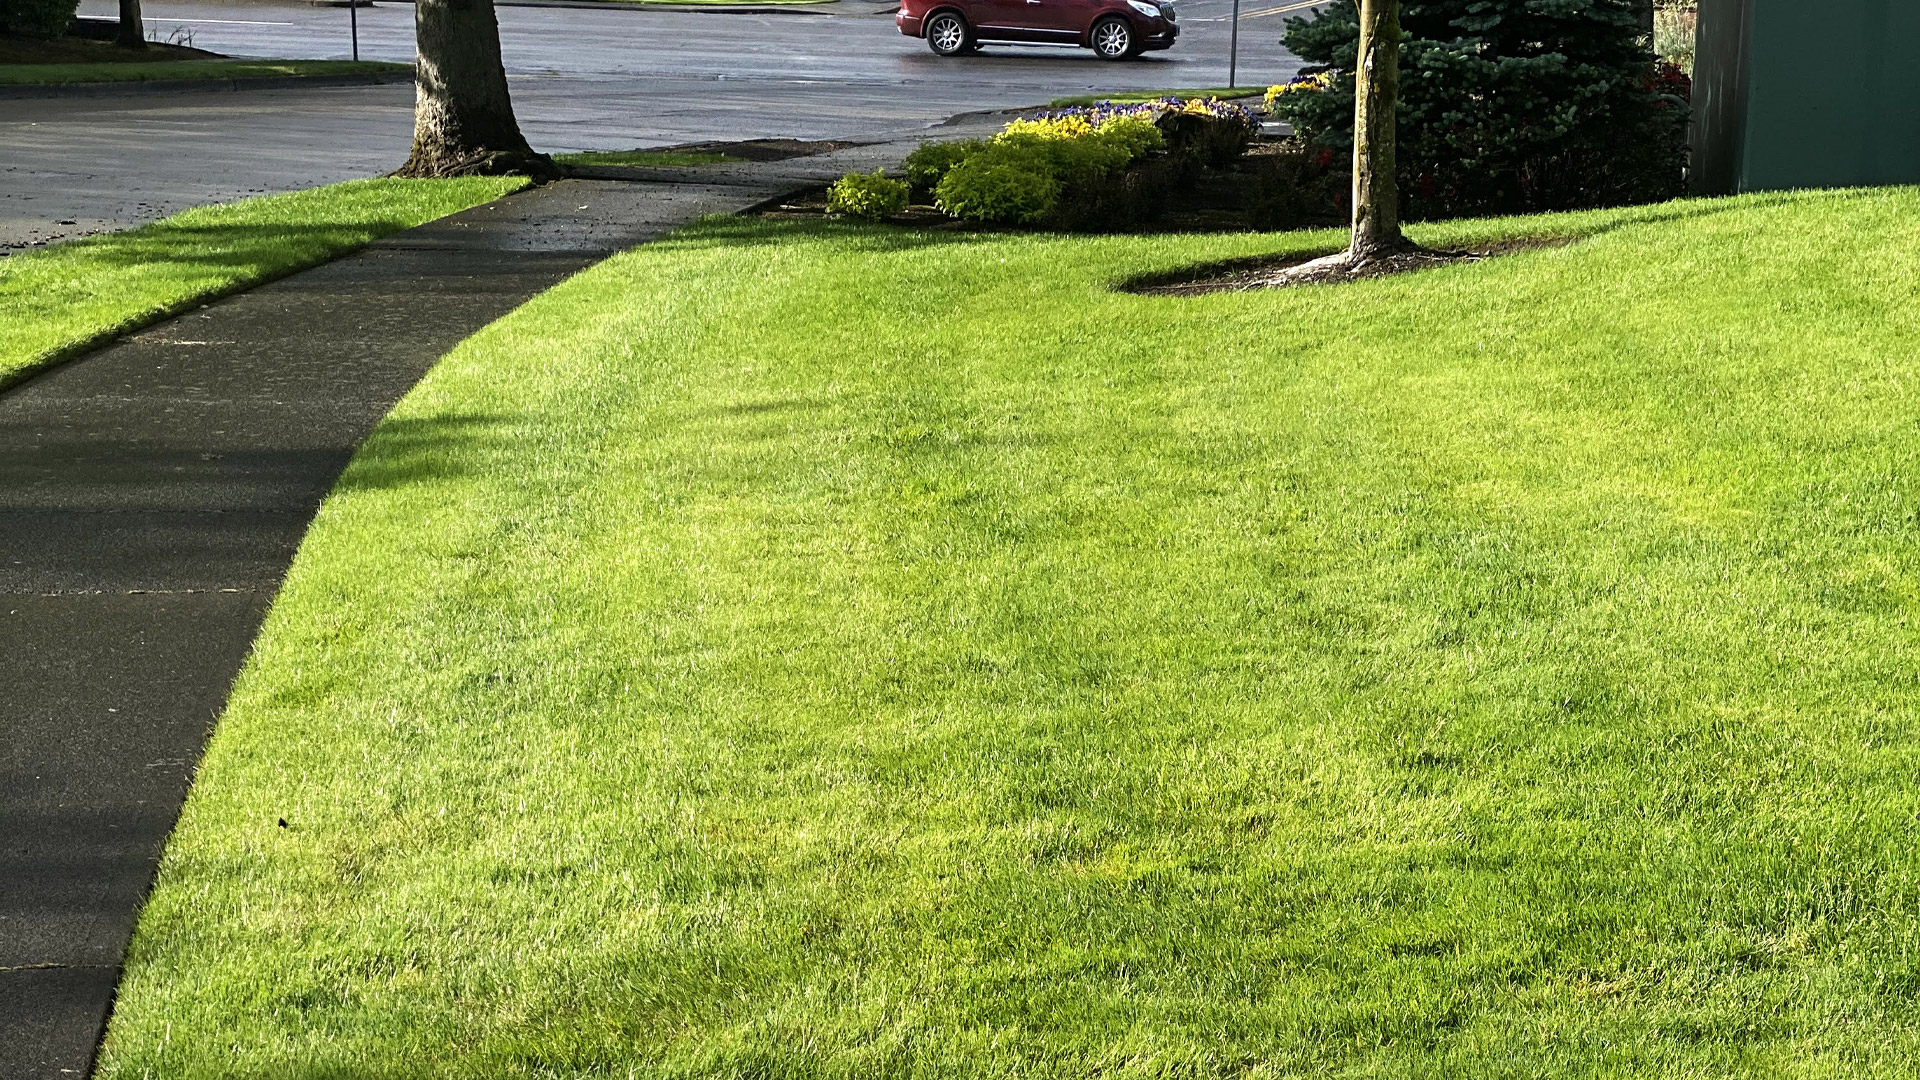 Recently mowed, fertilized, and maintained lawn at a residential property in Vancouver, WA.